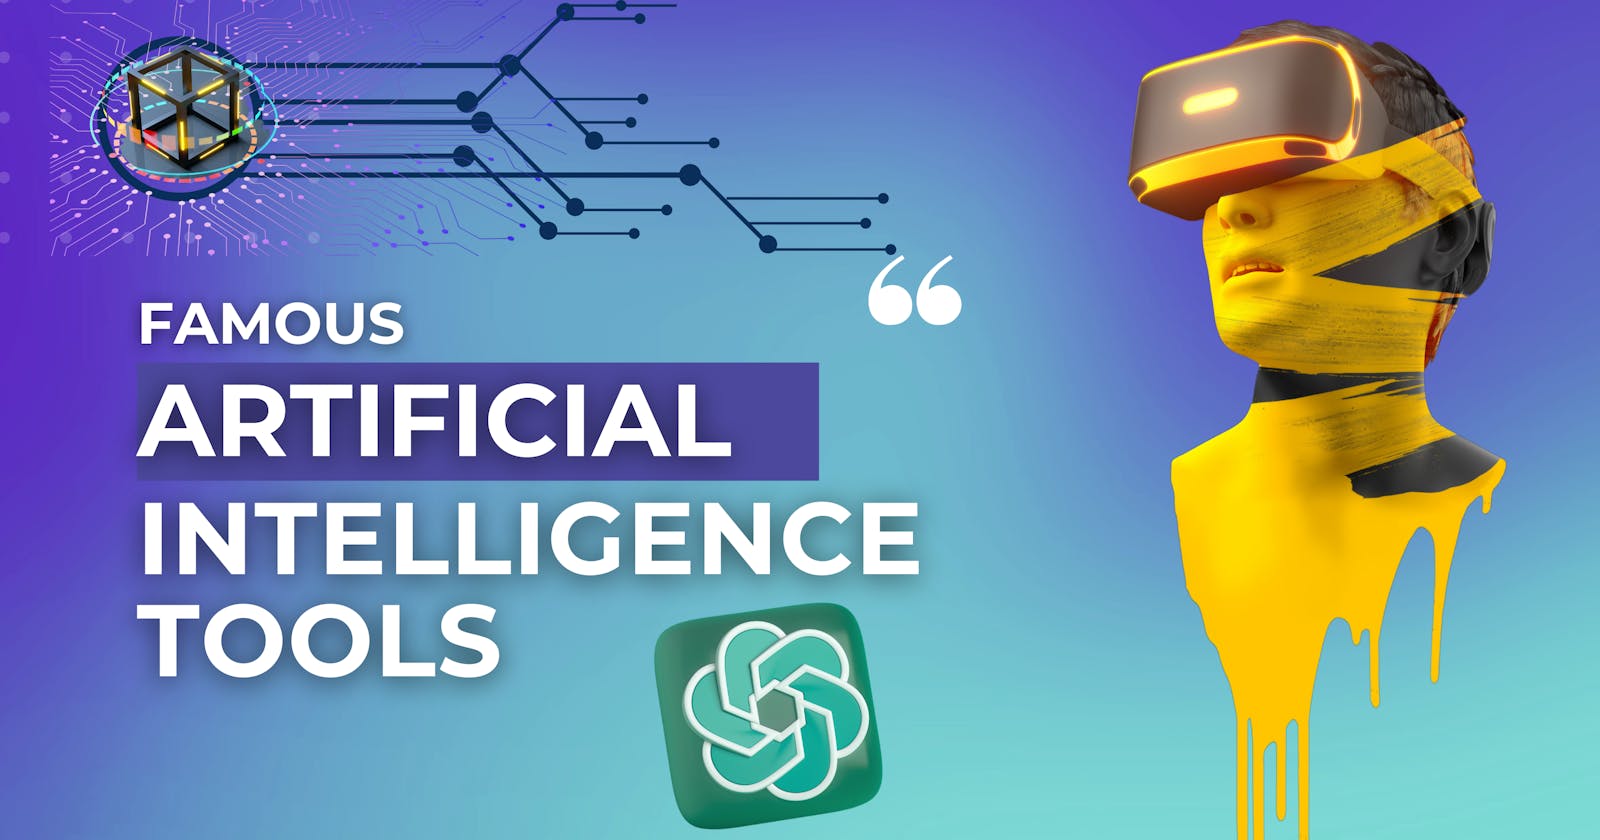 "The Top 10 Artificial Intelligence Tools You Need to Know About"